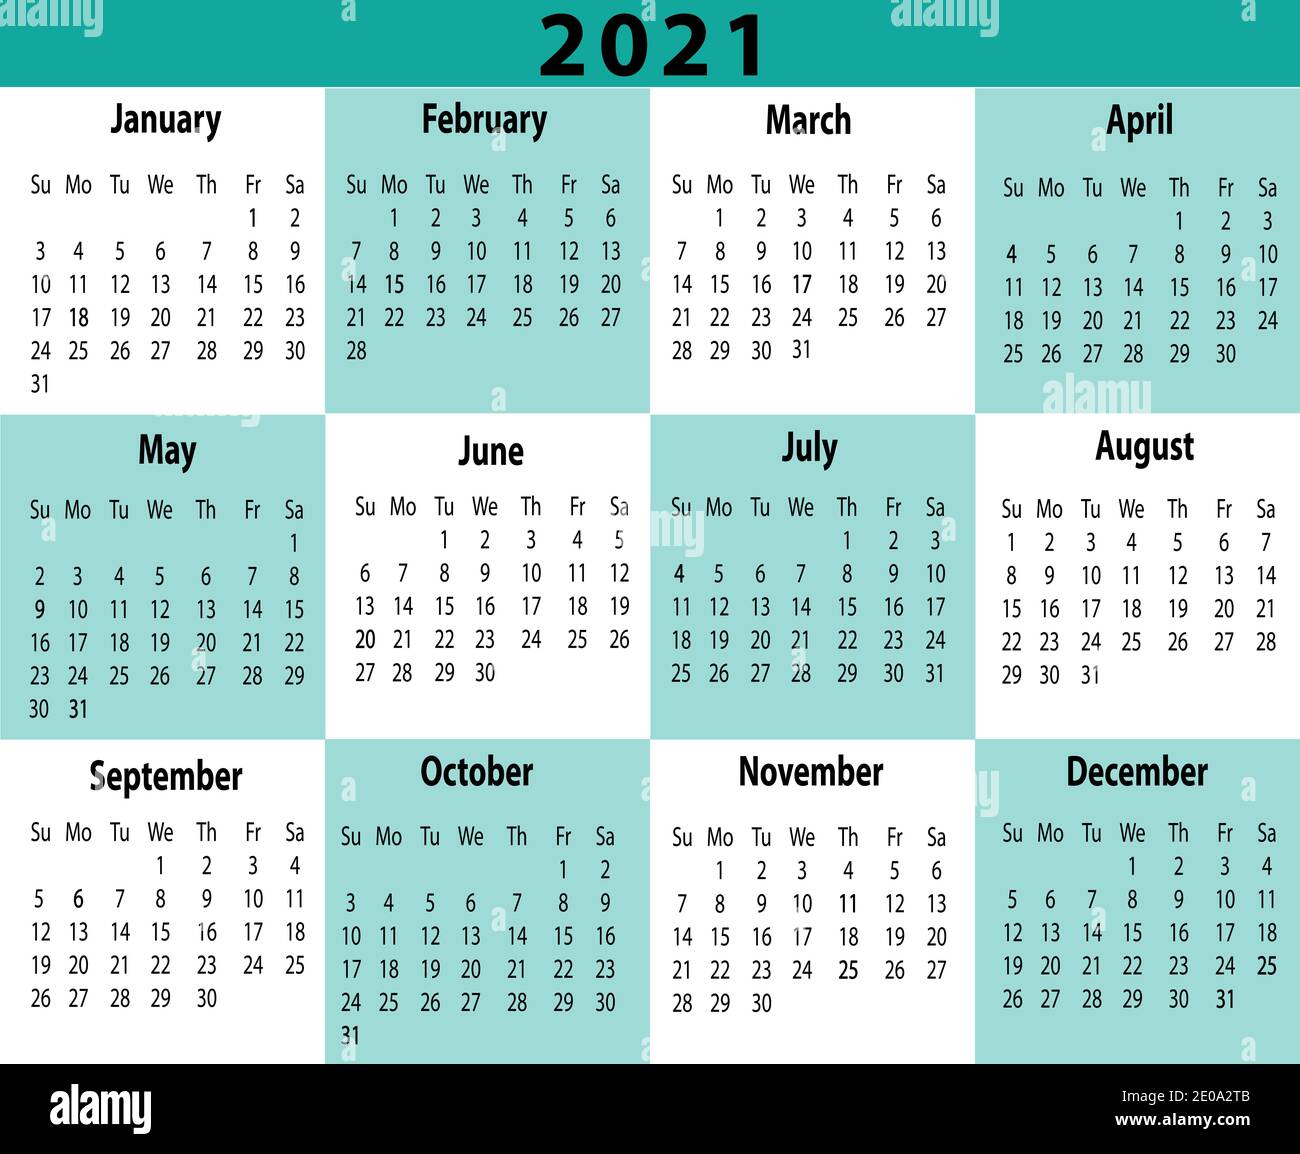 2021 Year Calendar One Page Horizontal Teal, Blue, Green Stock Photo